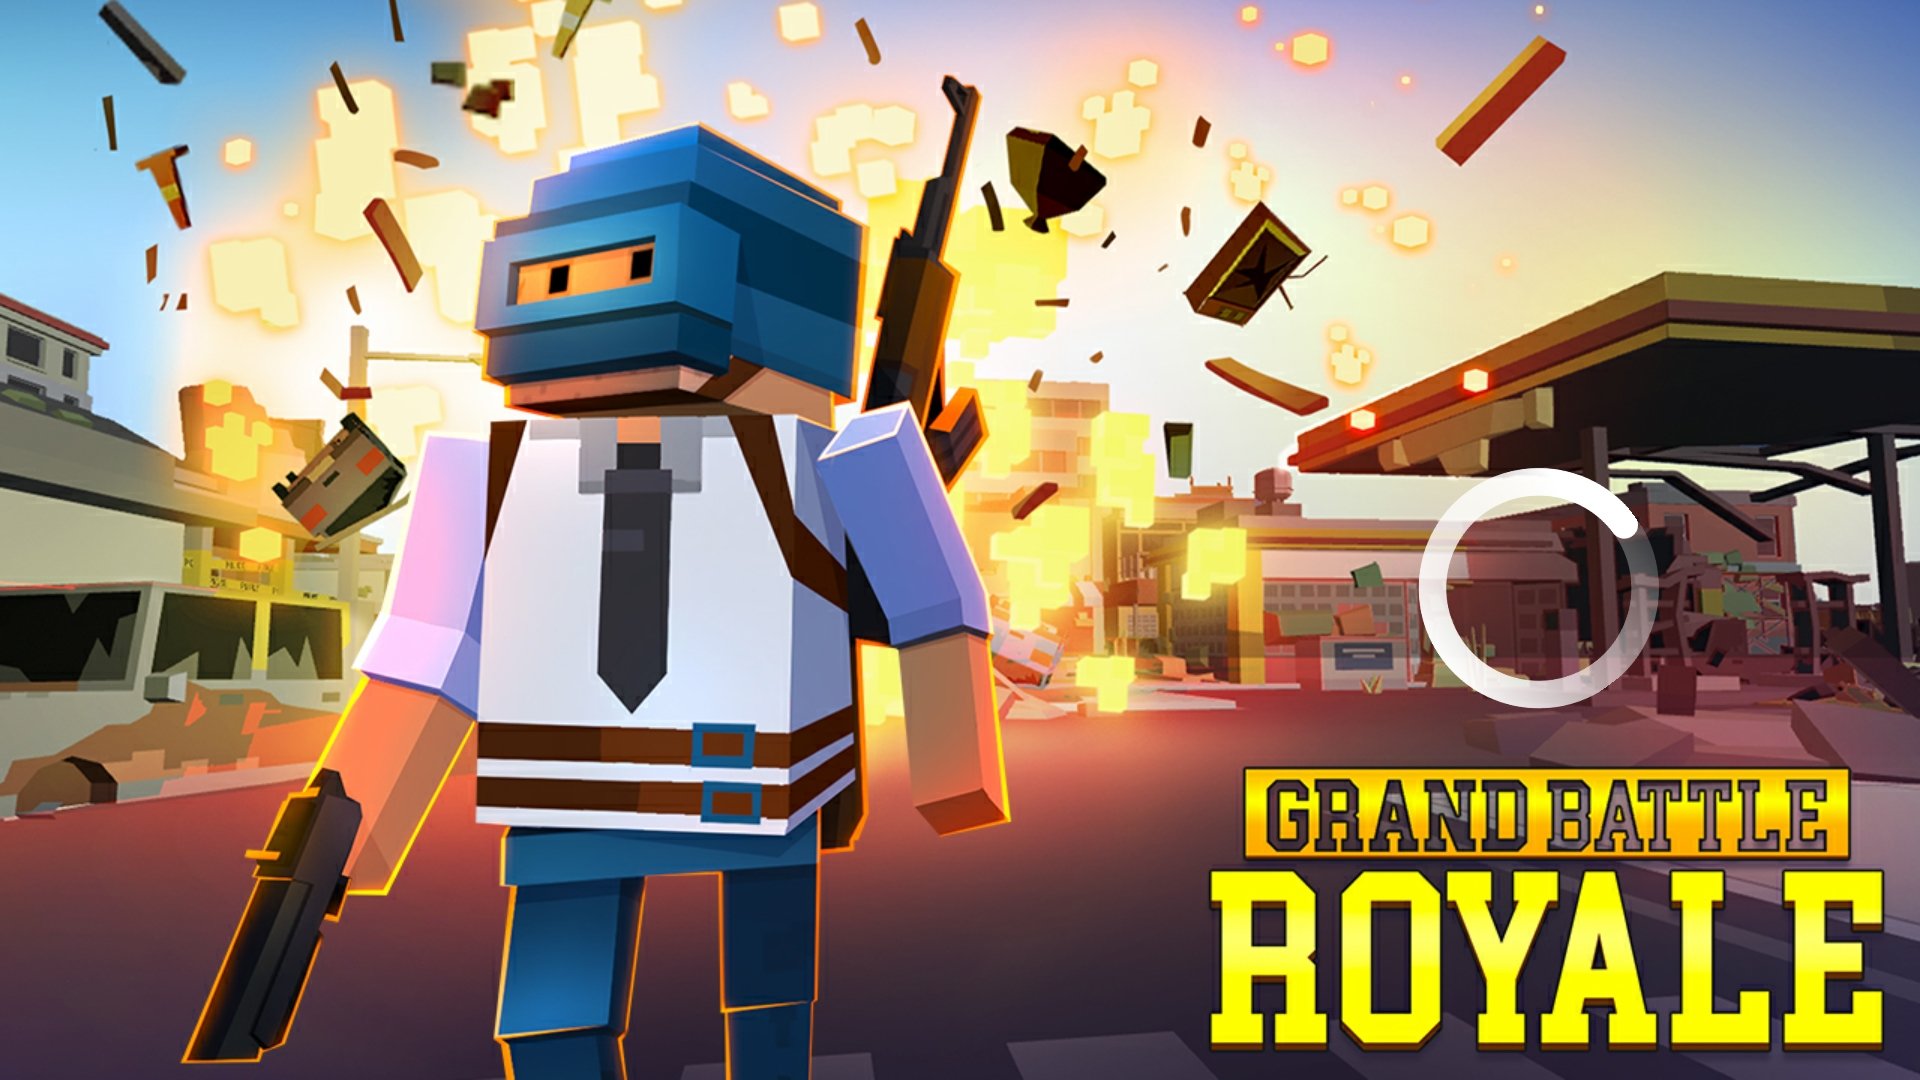 Download Grand Battle Royale 2.7 Android - APK Free